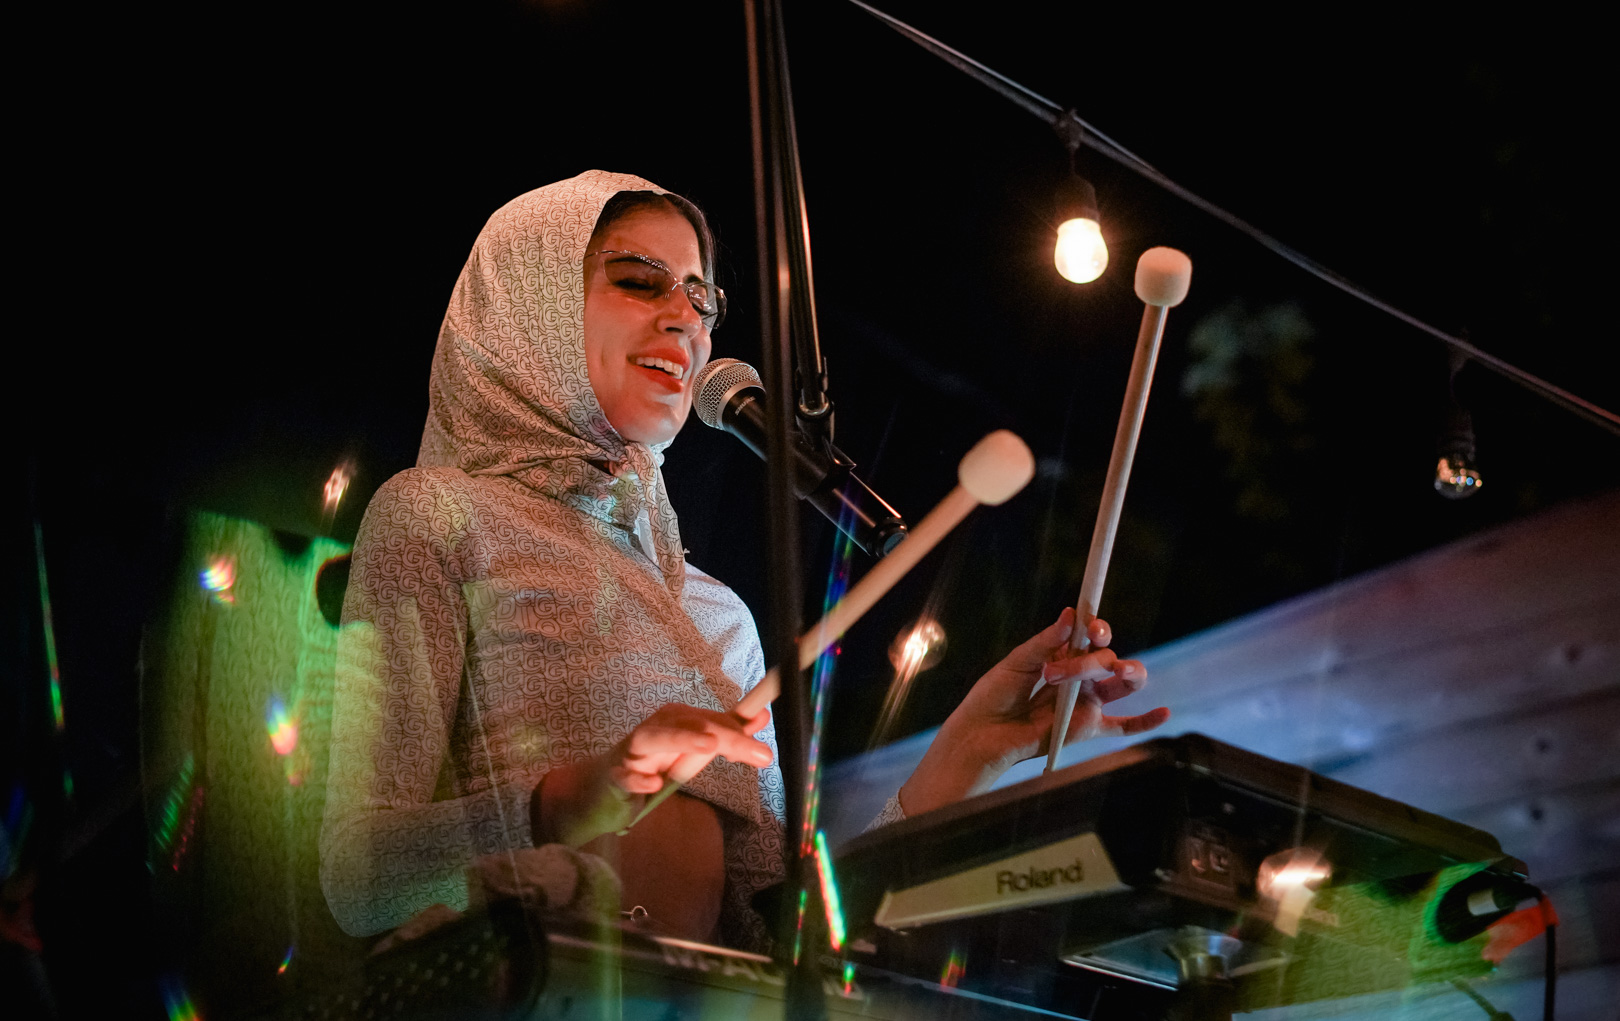 A woman singing and playing with percussion mallets on stage